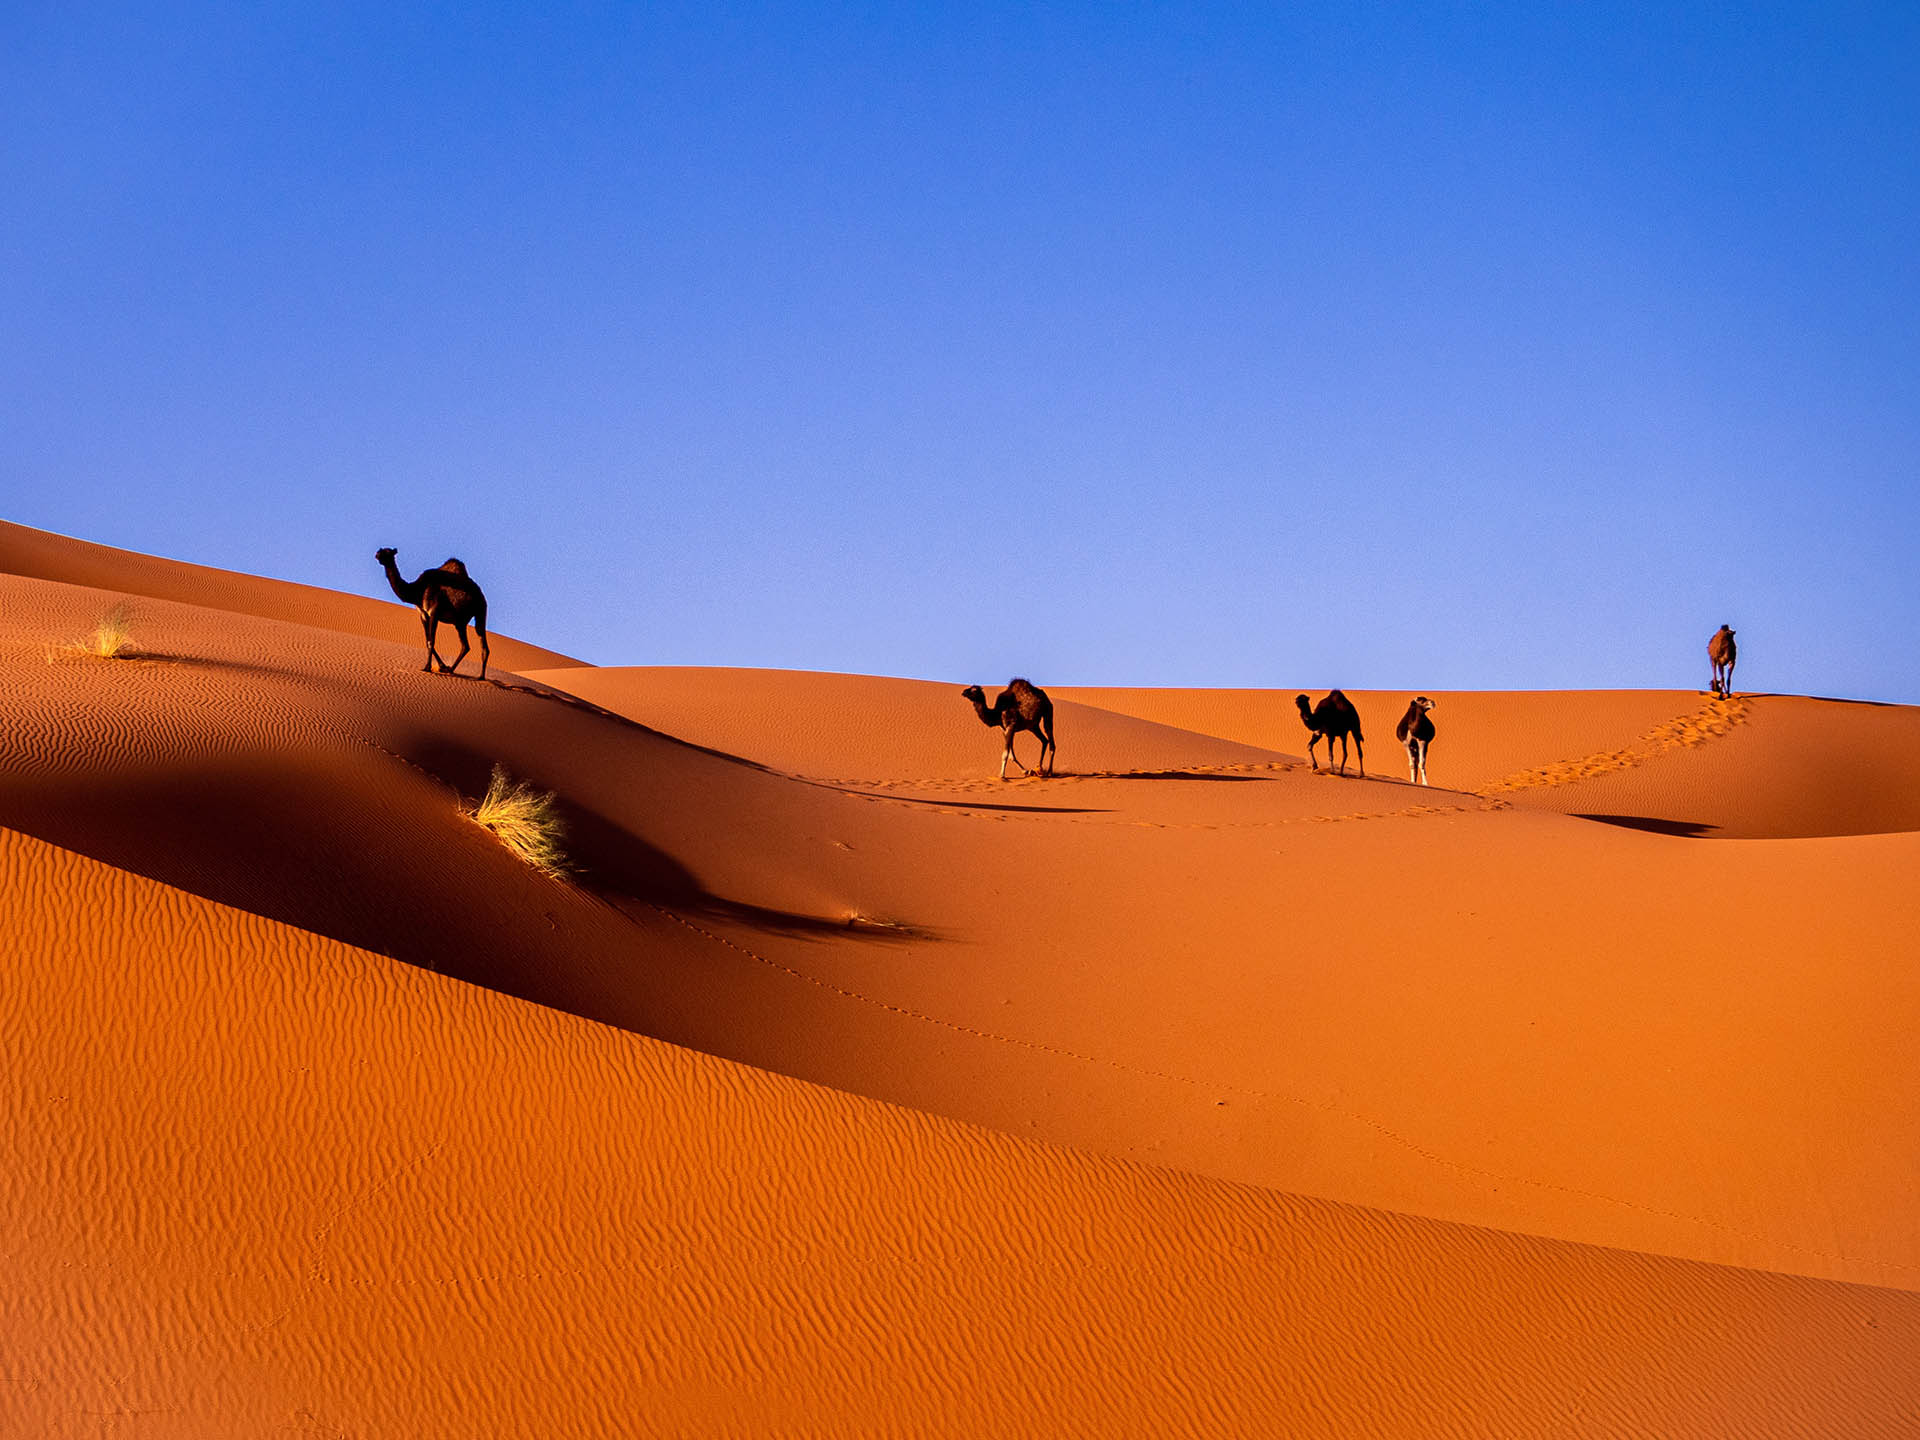 Experience the south & Red dunes from Marrakech